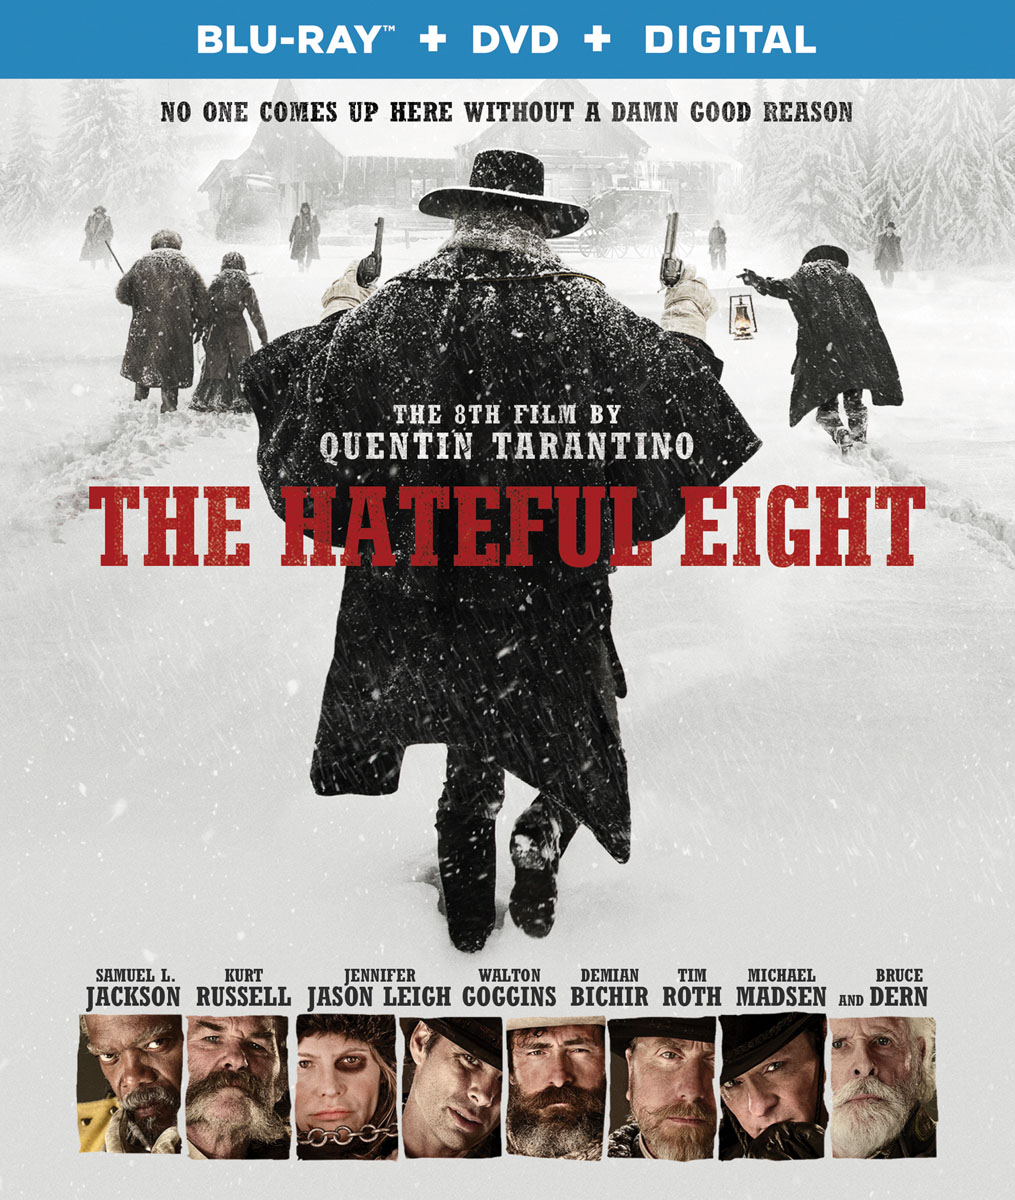 The Hateful Eight (with DVD And Digital Download) - Blu-ray [ 2015 ]  - Western Movies On Blu-ray - Movies On GRUV